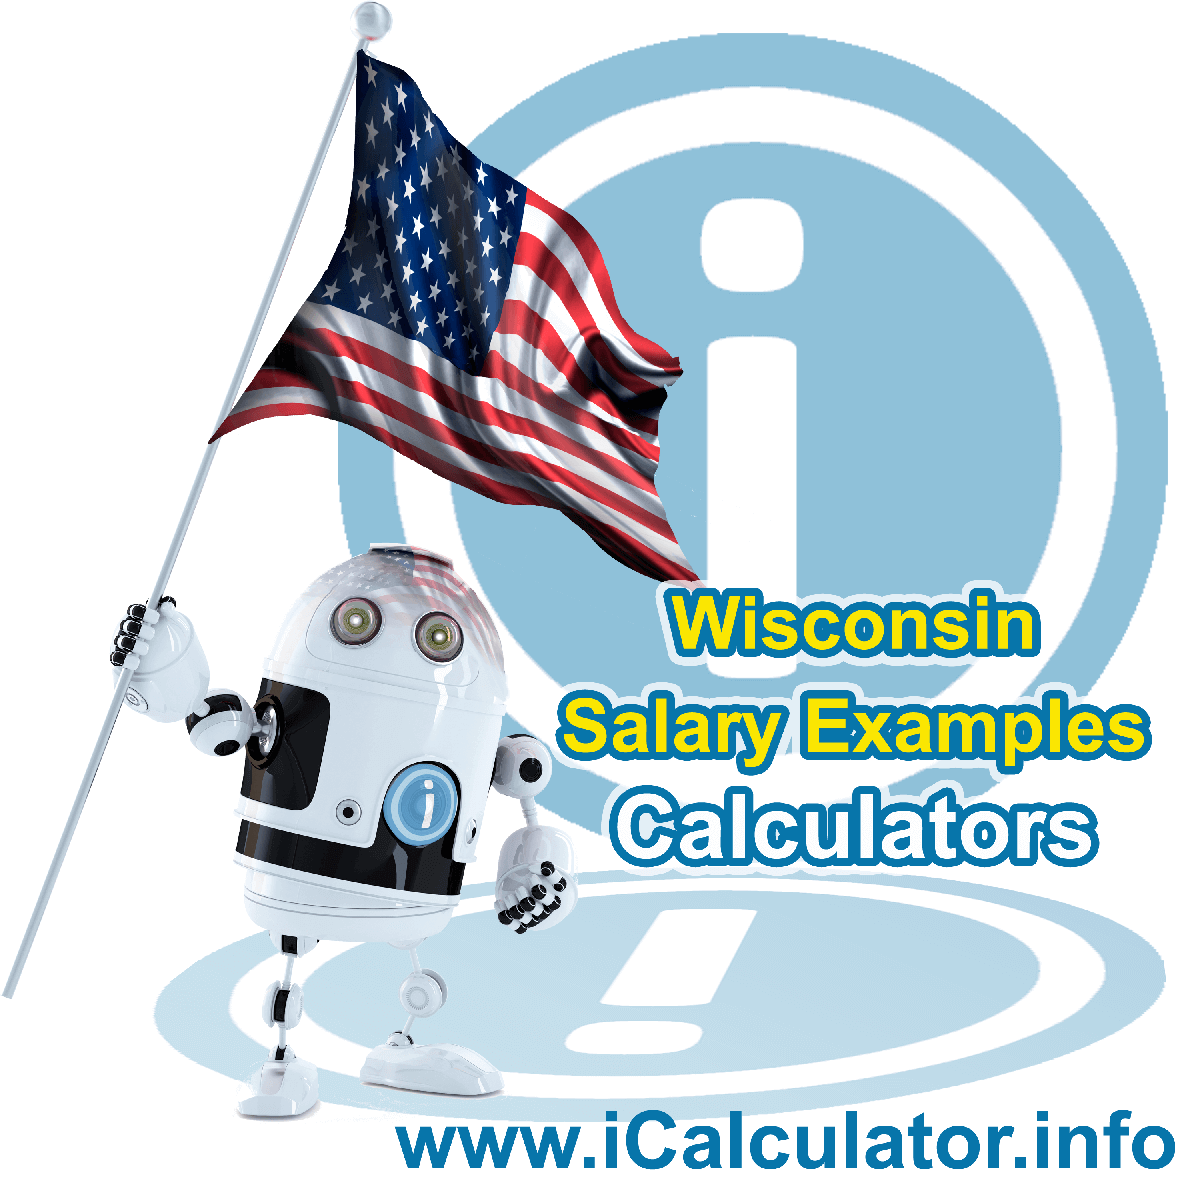 Wisconsin Salary Example for $ 190,000.00 in 2023 | iCalculator™ | $ 190,000.00 salary example for employee and employer paying Wisconsin State tincome taxes. Detailed salary after tax calculation including Wisconsin State Tax, Federal State Tax, Medicare Deductions, Social Security, Capital Gains and other income tax and salary deductions complete with supporting Wisconsin state tax tables 